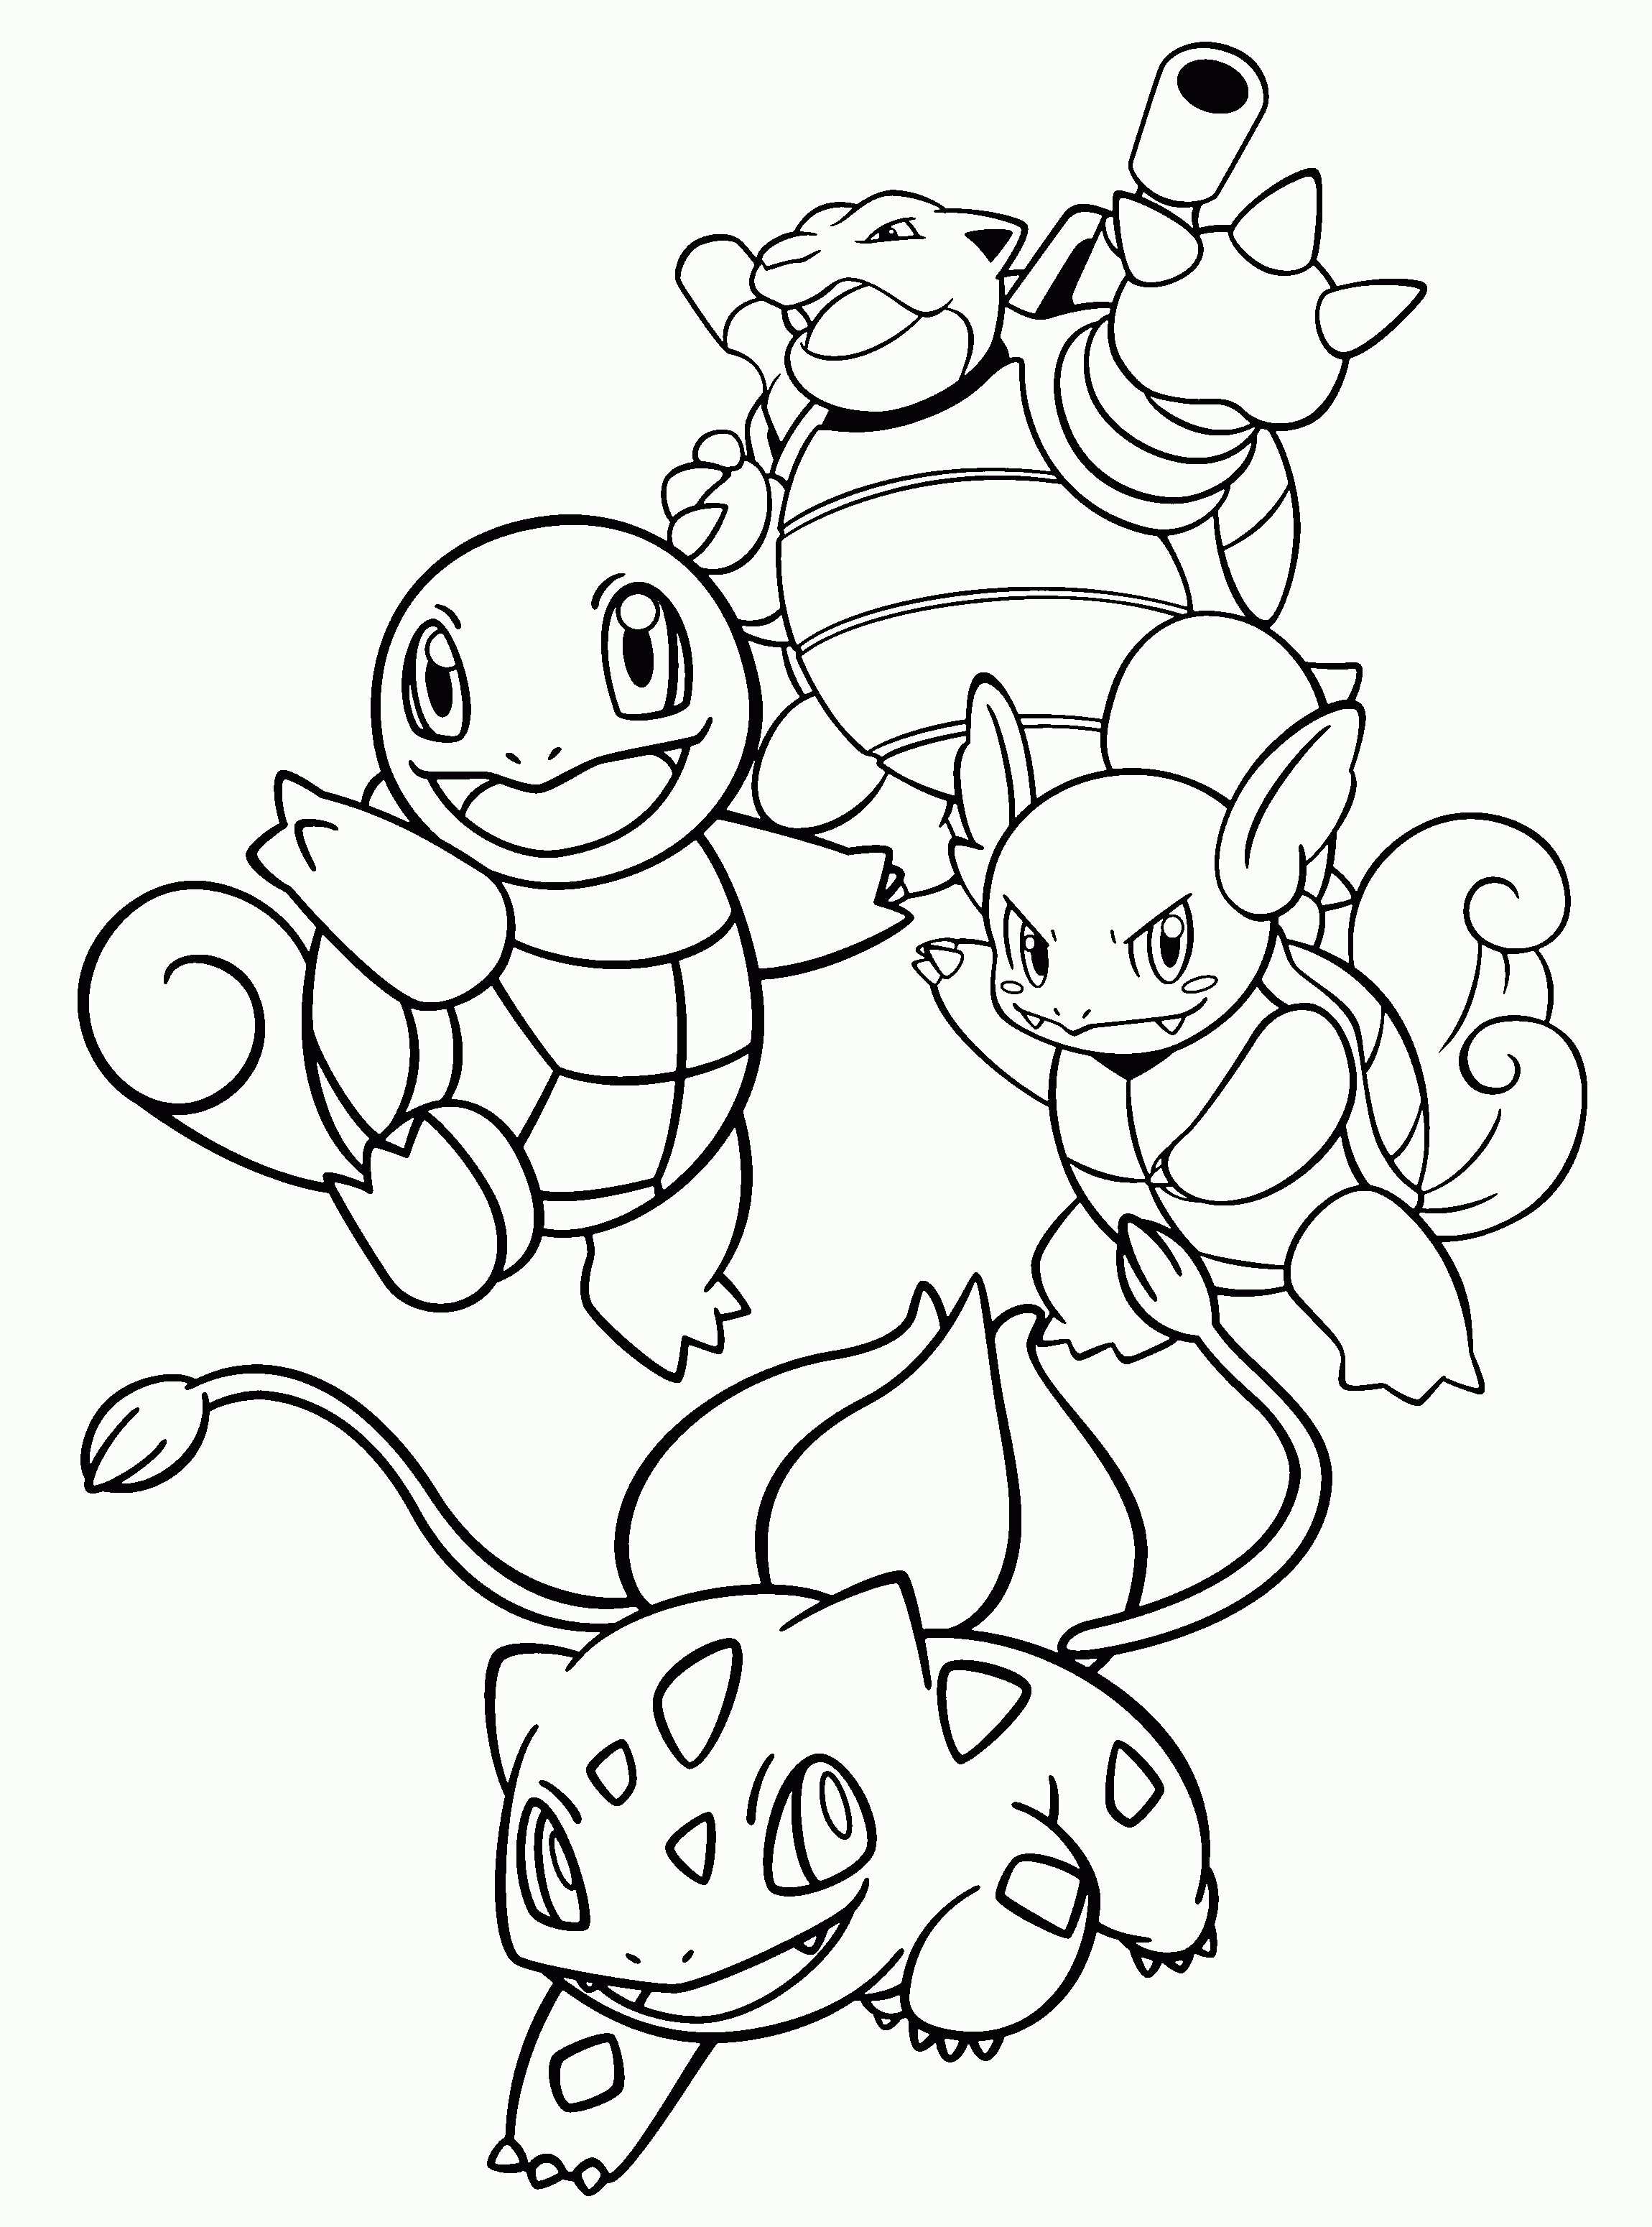 38 Various Coloring Page Pokemon Pokemon Coloring Pages Pokemon